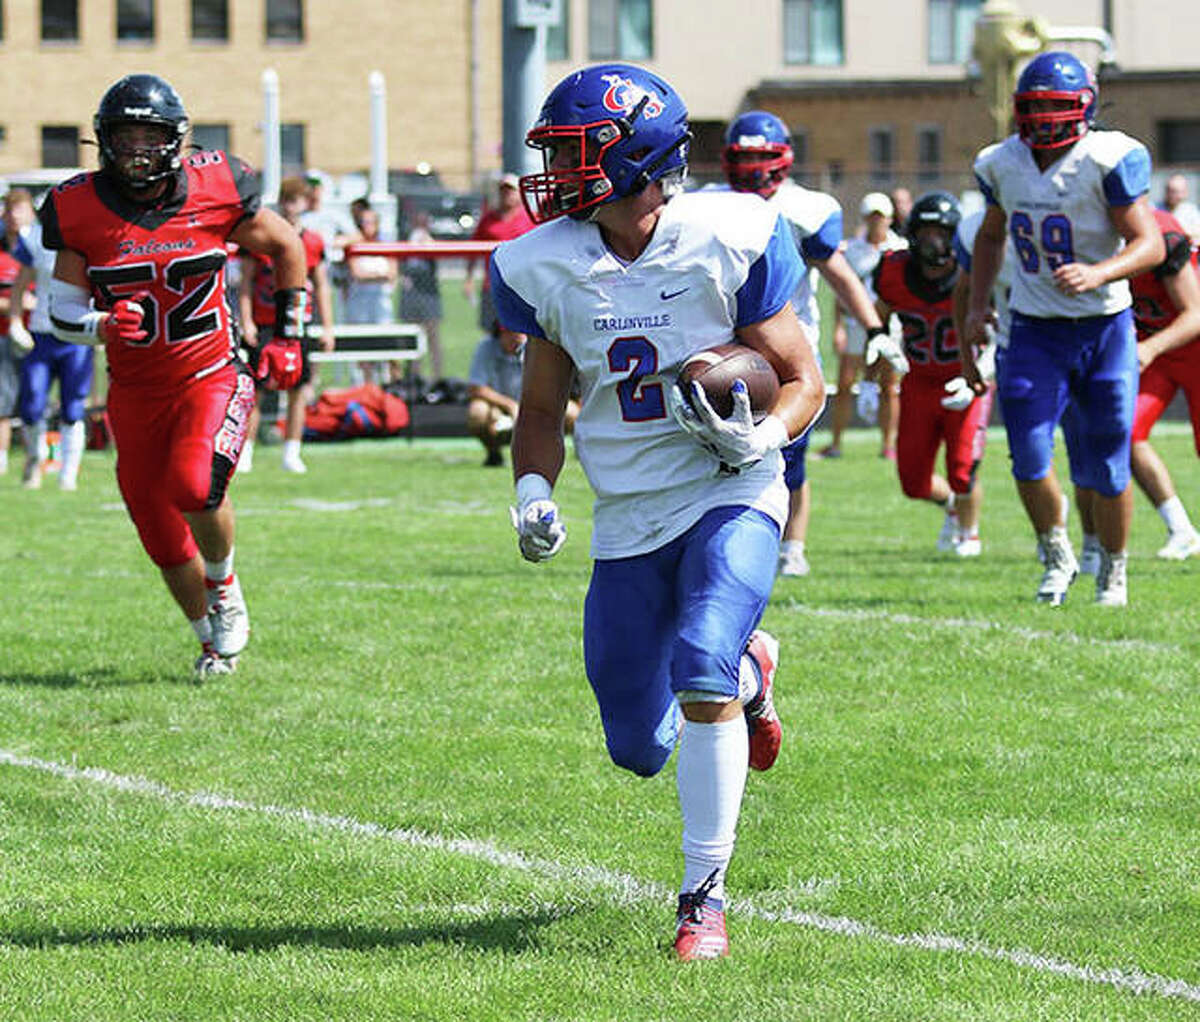 Carlinville’s Carson Wiser runs from defenders in a Week 1 win at Gibson City. On Friday in Gillespie, Wiser had nine receptions for 126 yards in the Cavaliers’ SCC win over the Miners.